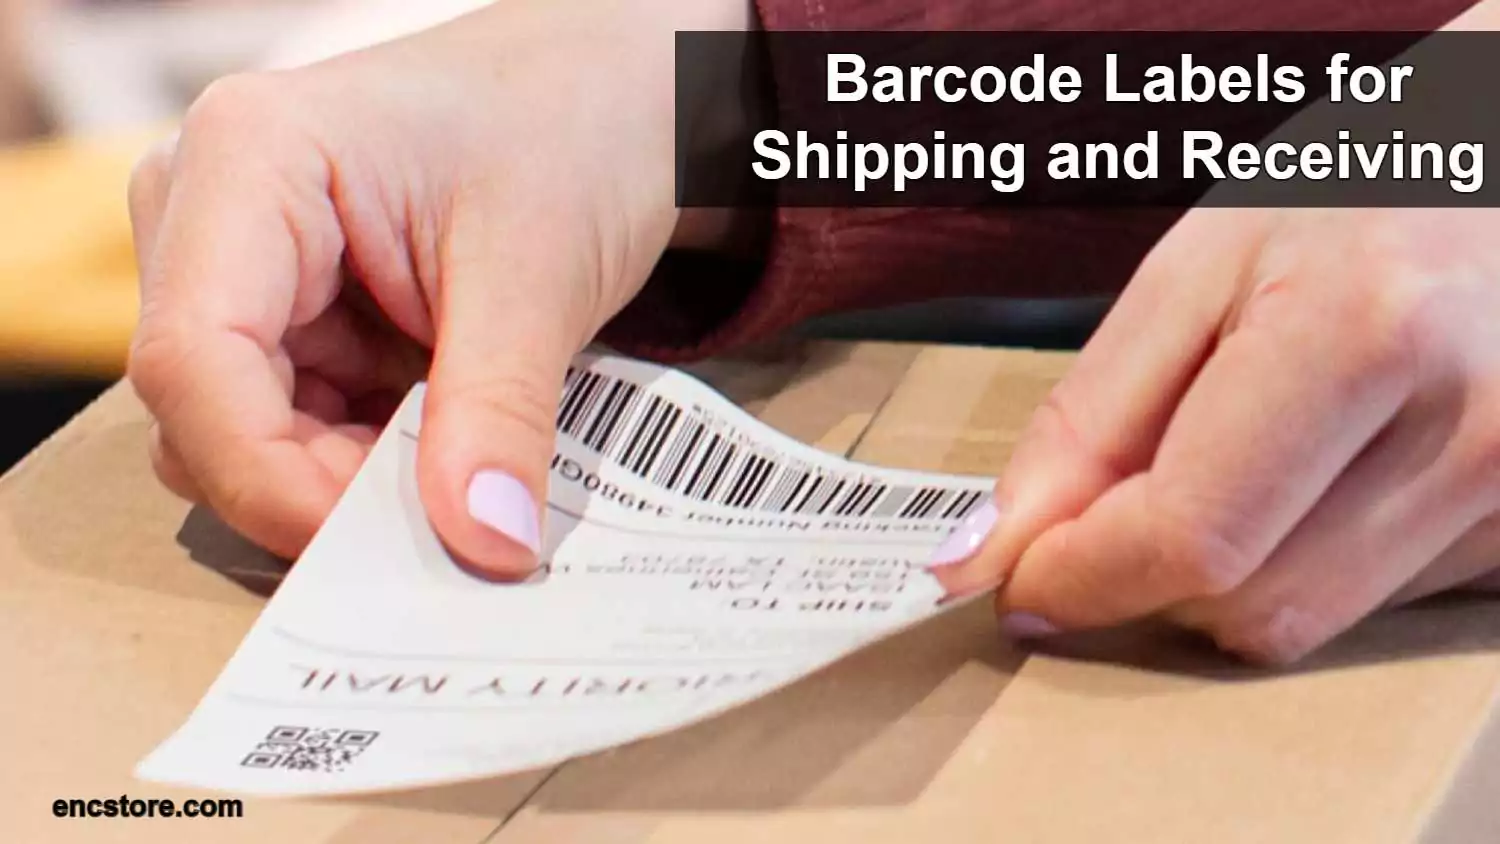 Barcode Labels for Shipping